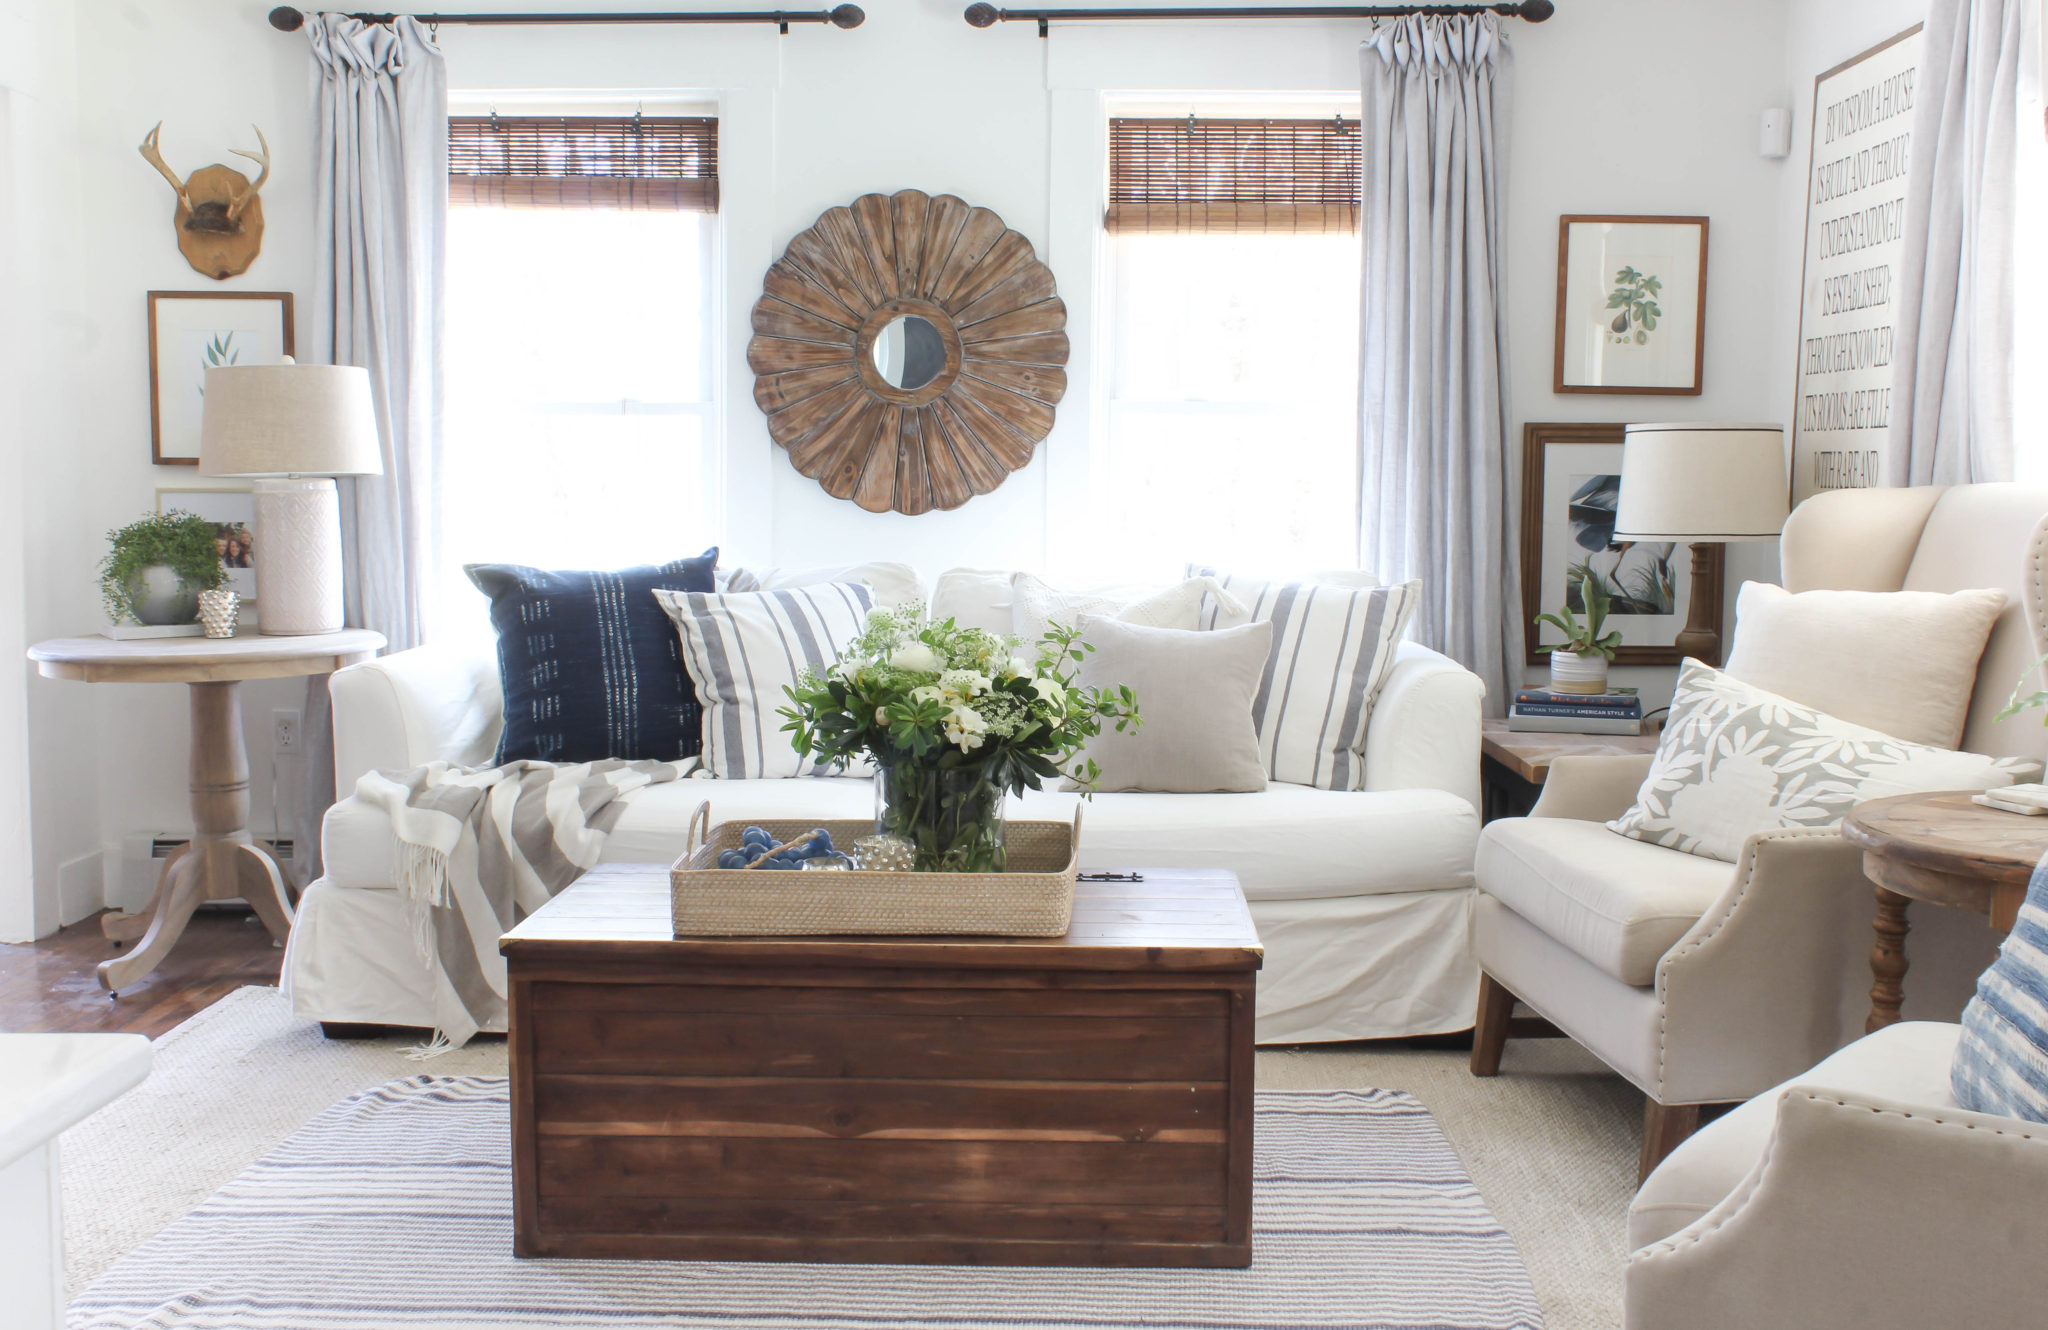 My Favorite Home Decor Staples for adding Layers - Rooms For Rent blog